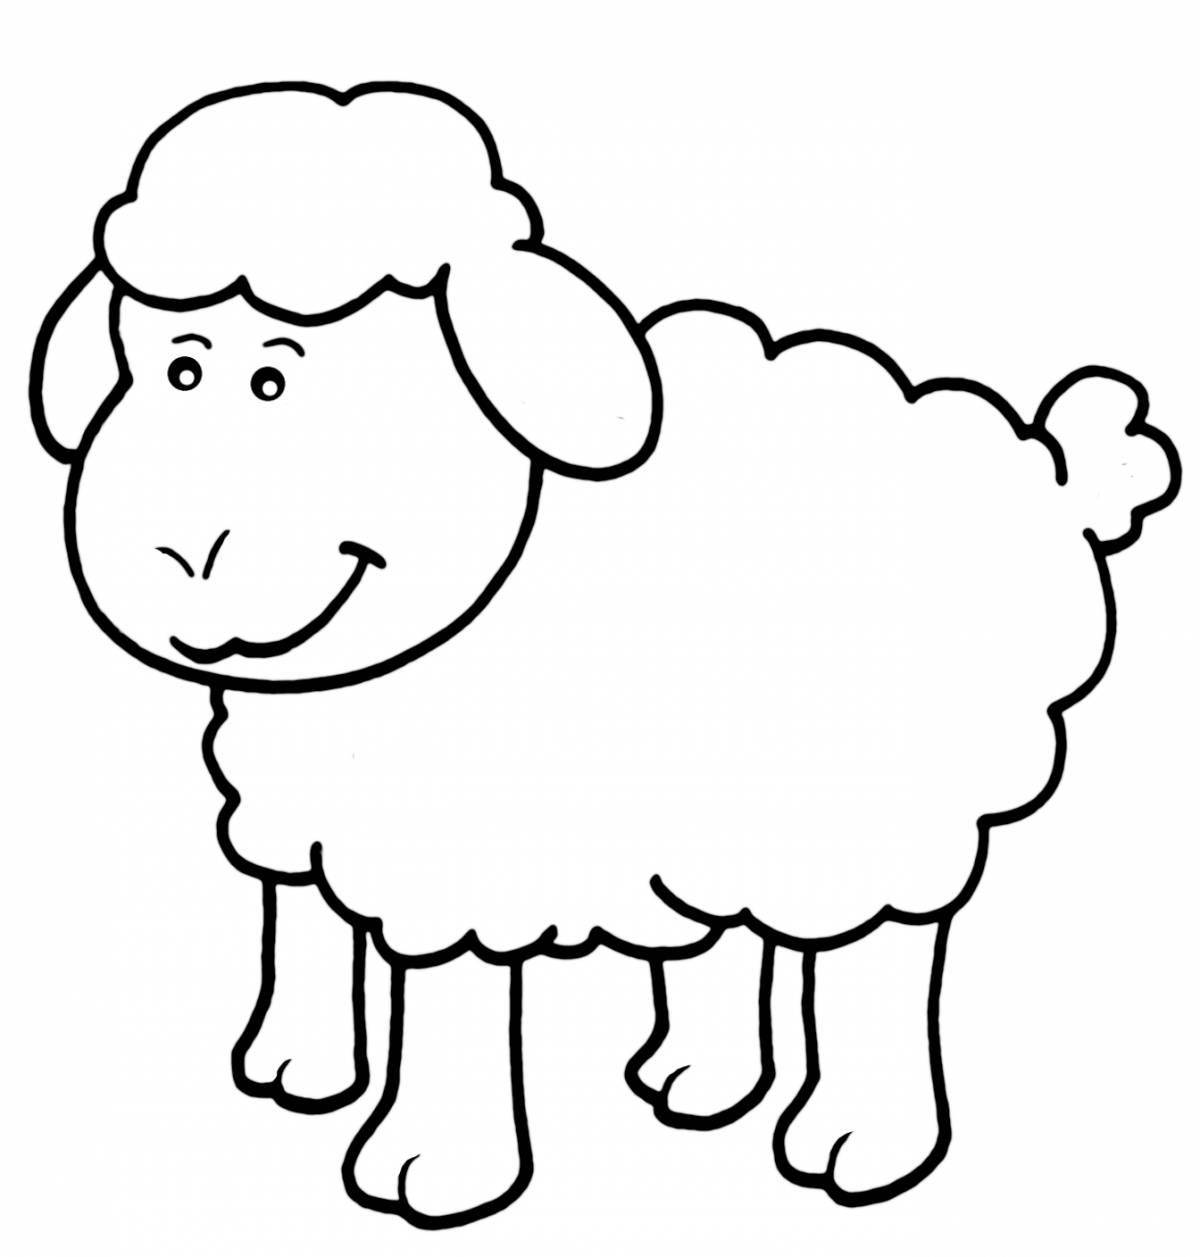 Bright ram coloring for kids